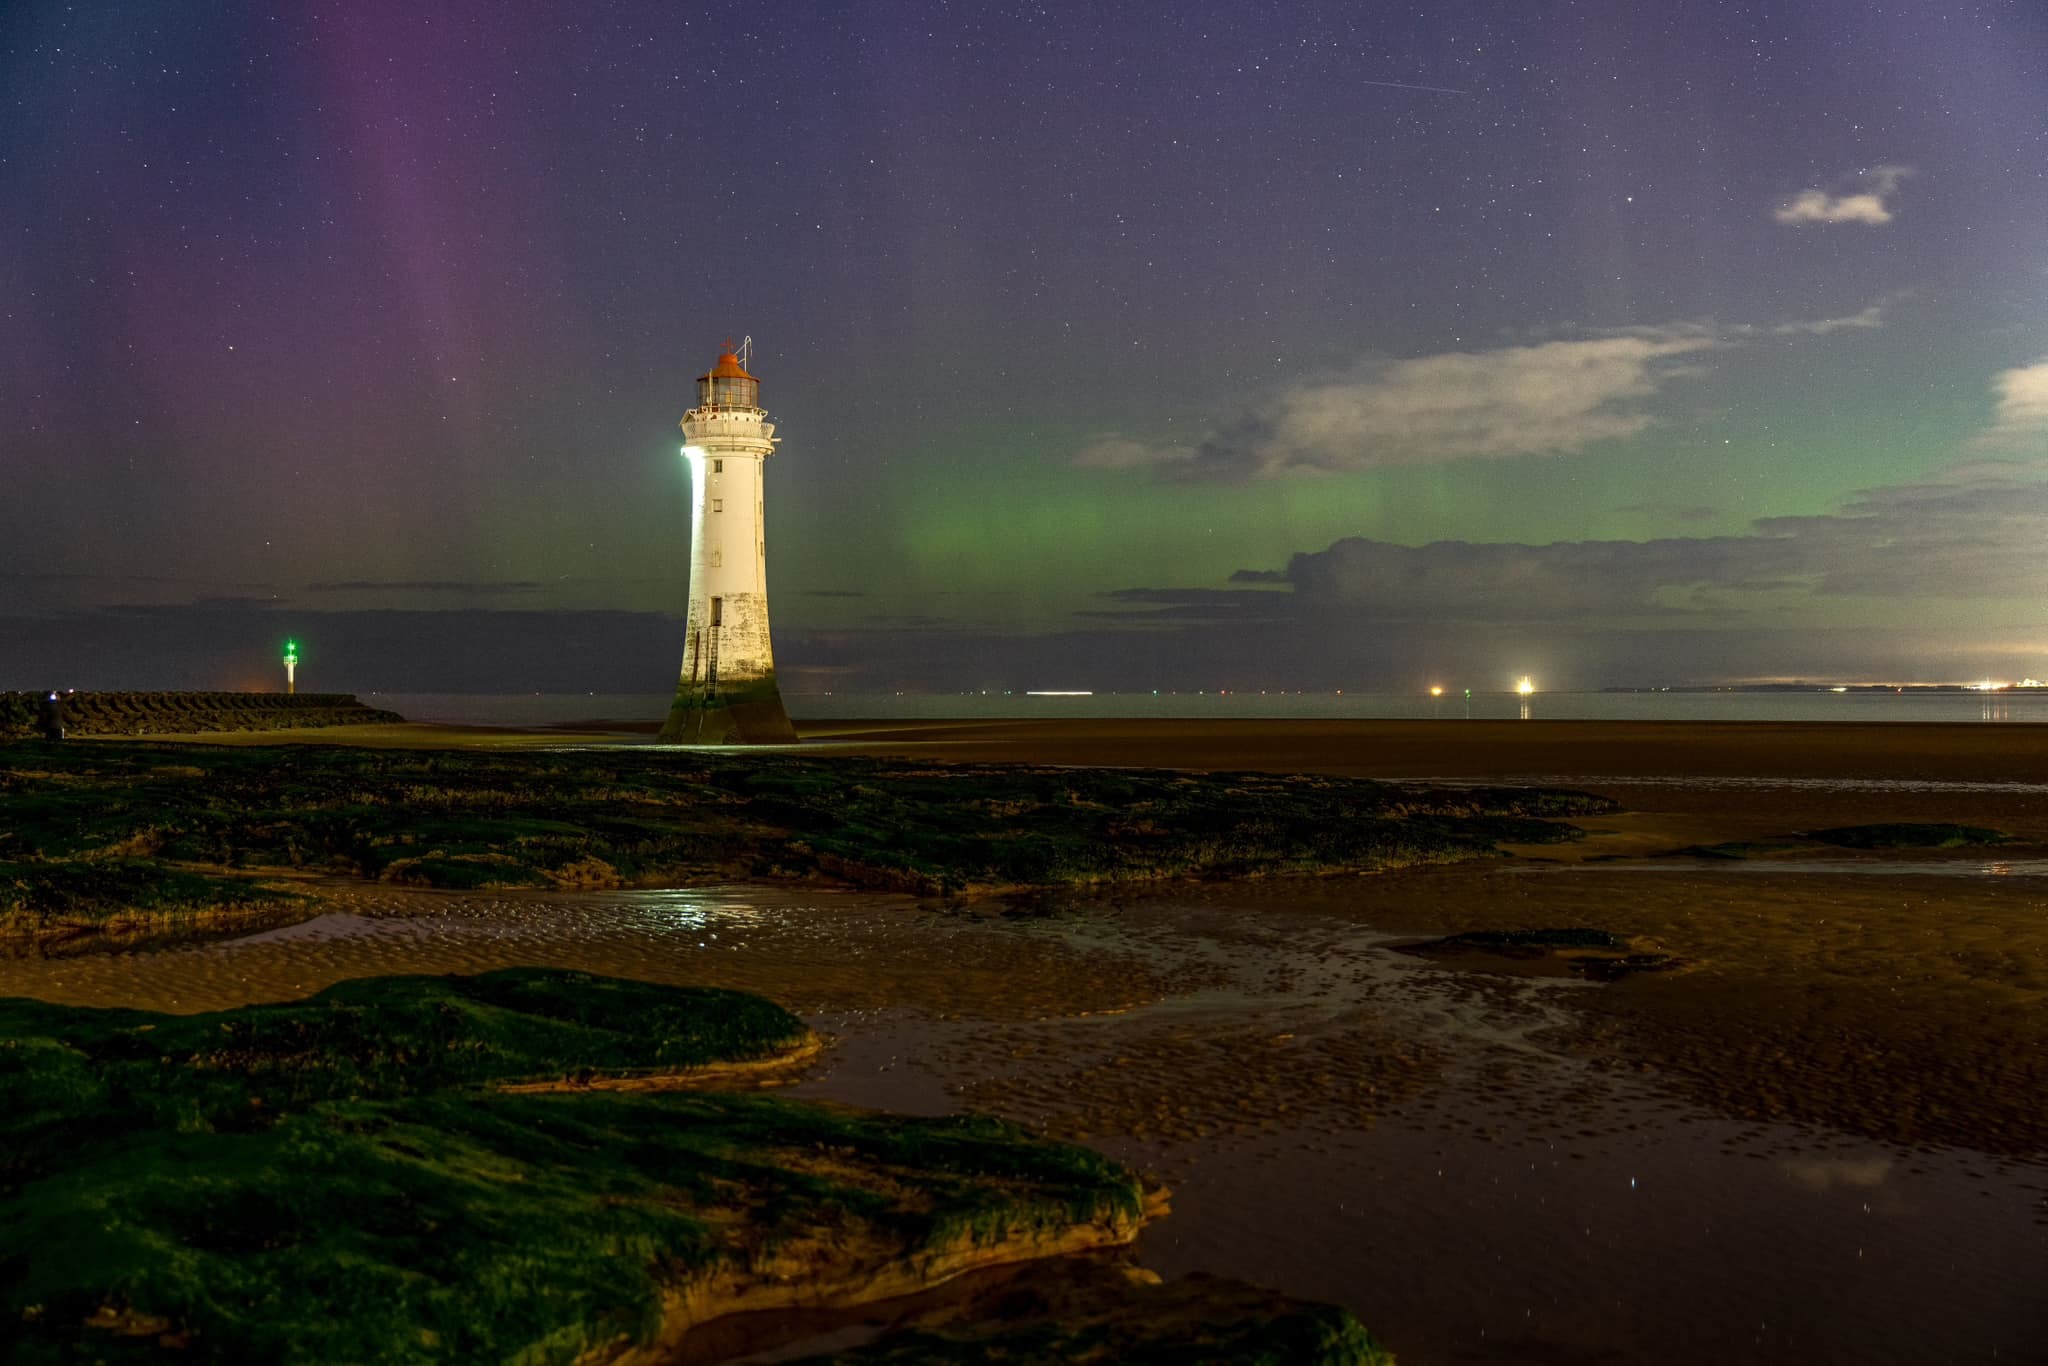 Dave Mort was in New Brighton to spot the lights